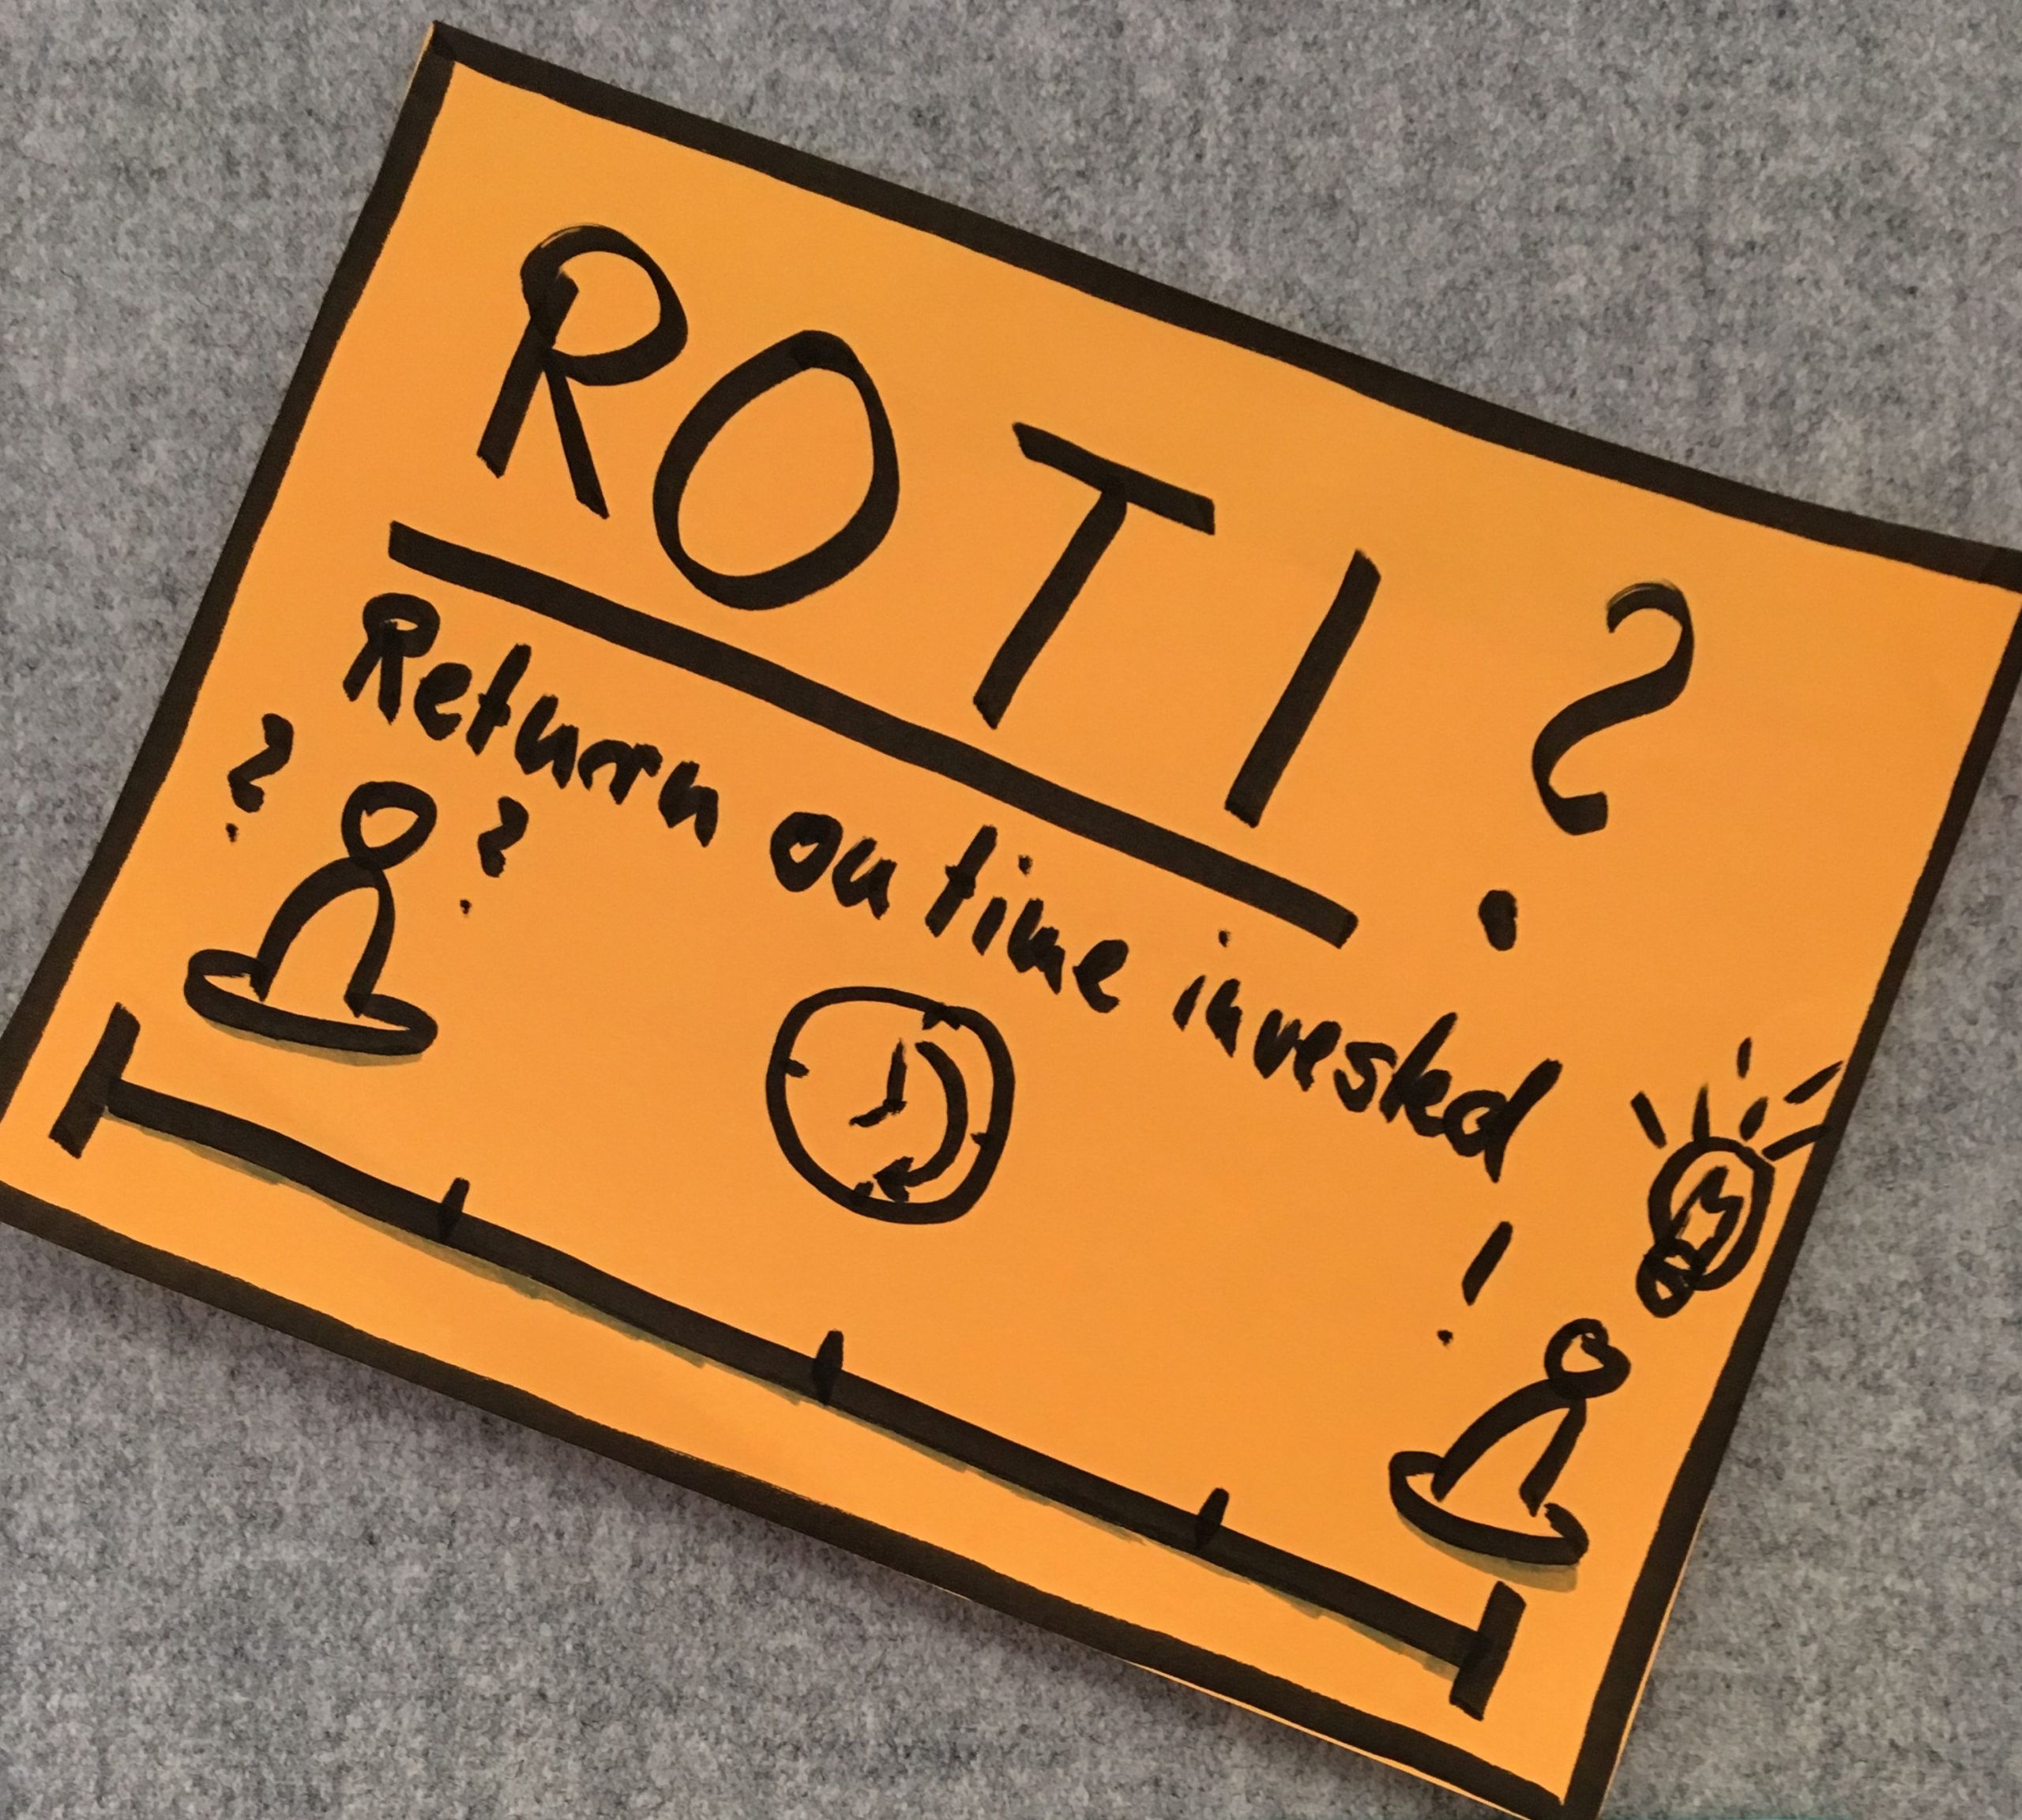 ROTI - Return On Time Invested